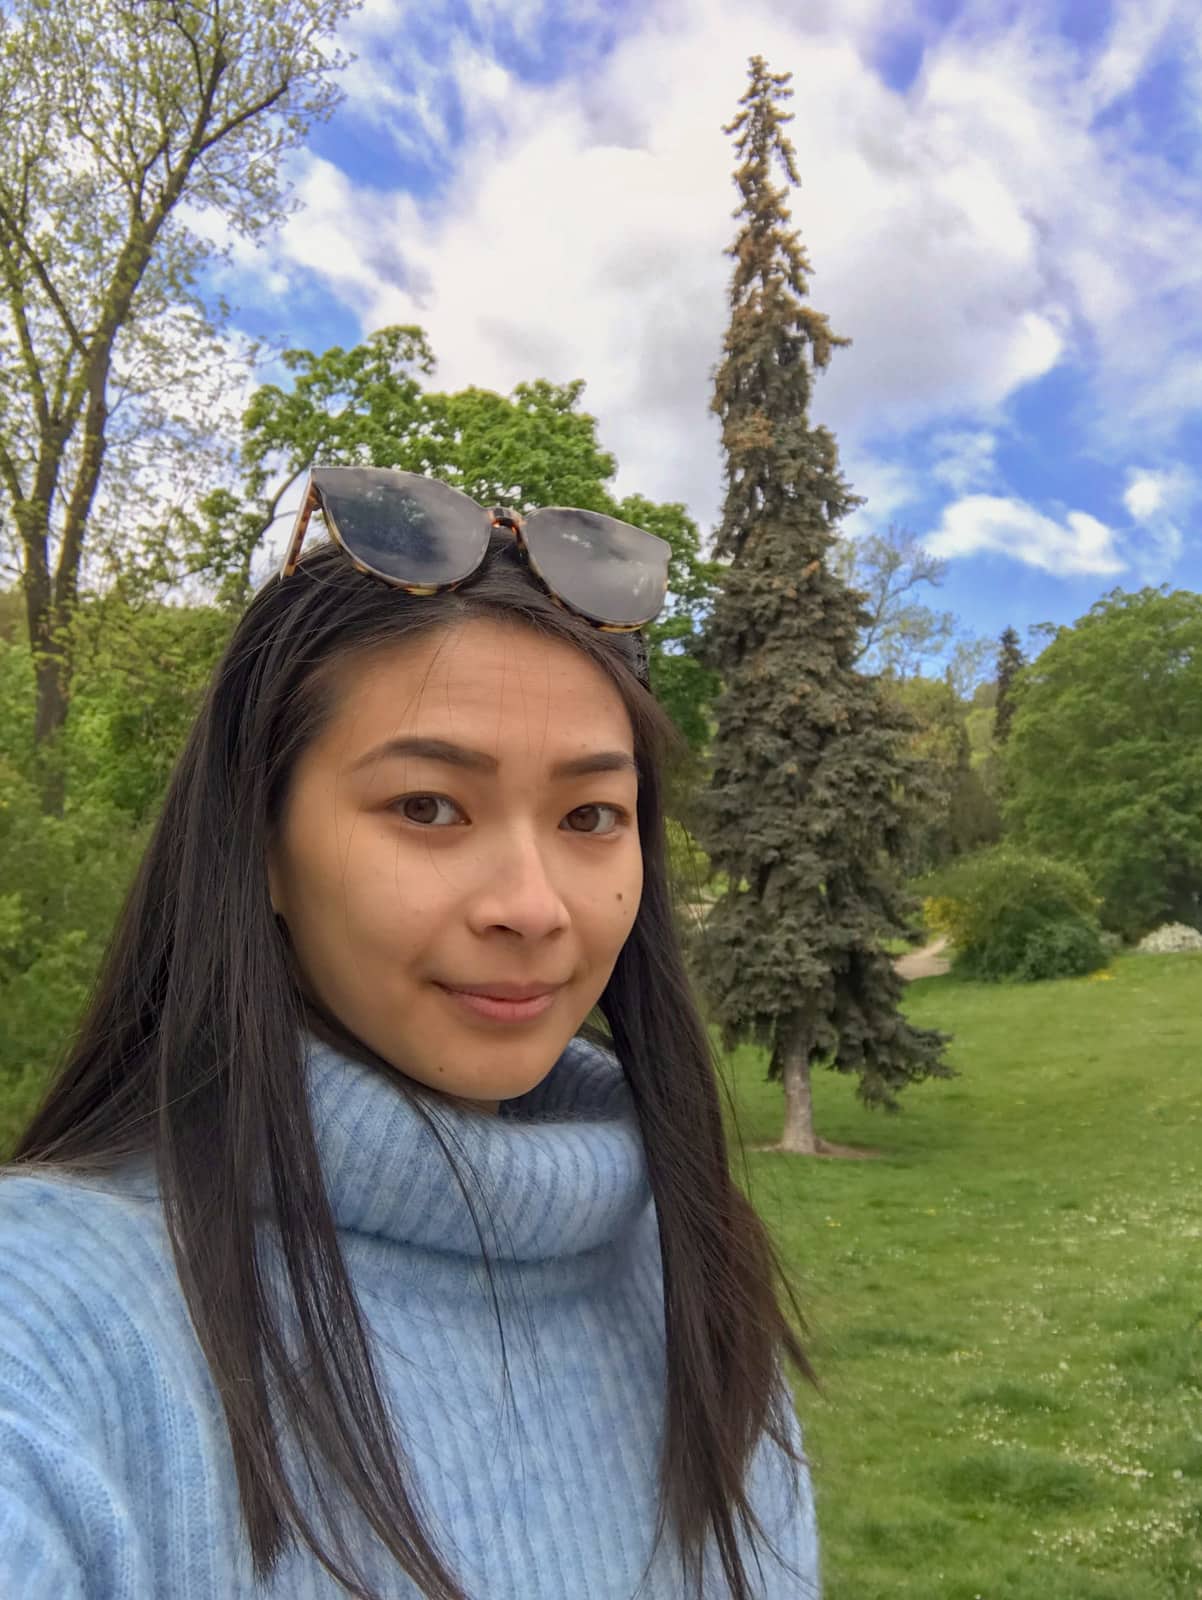 A woman with dark hair and a light blue sweater taking a selfie in an open green grassy area with lots of trees.